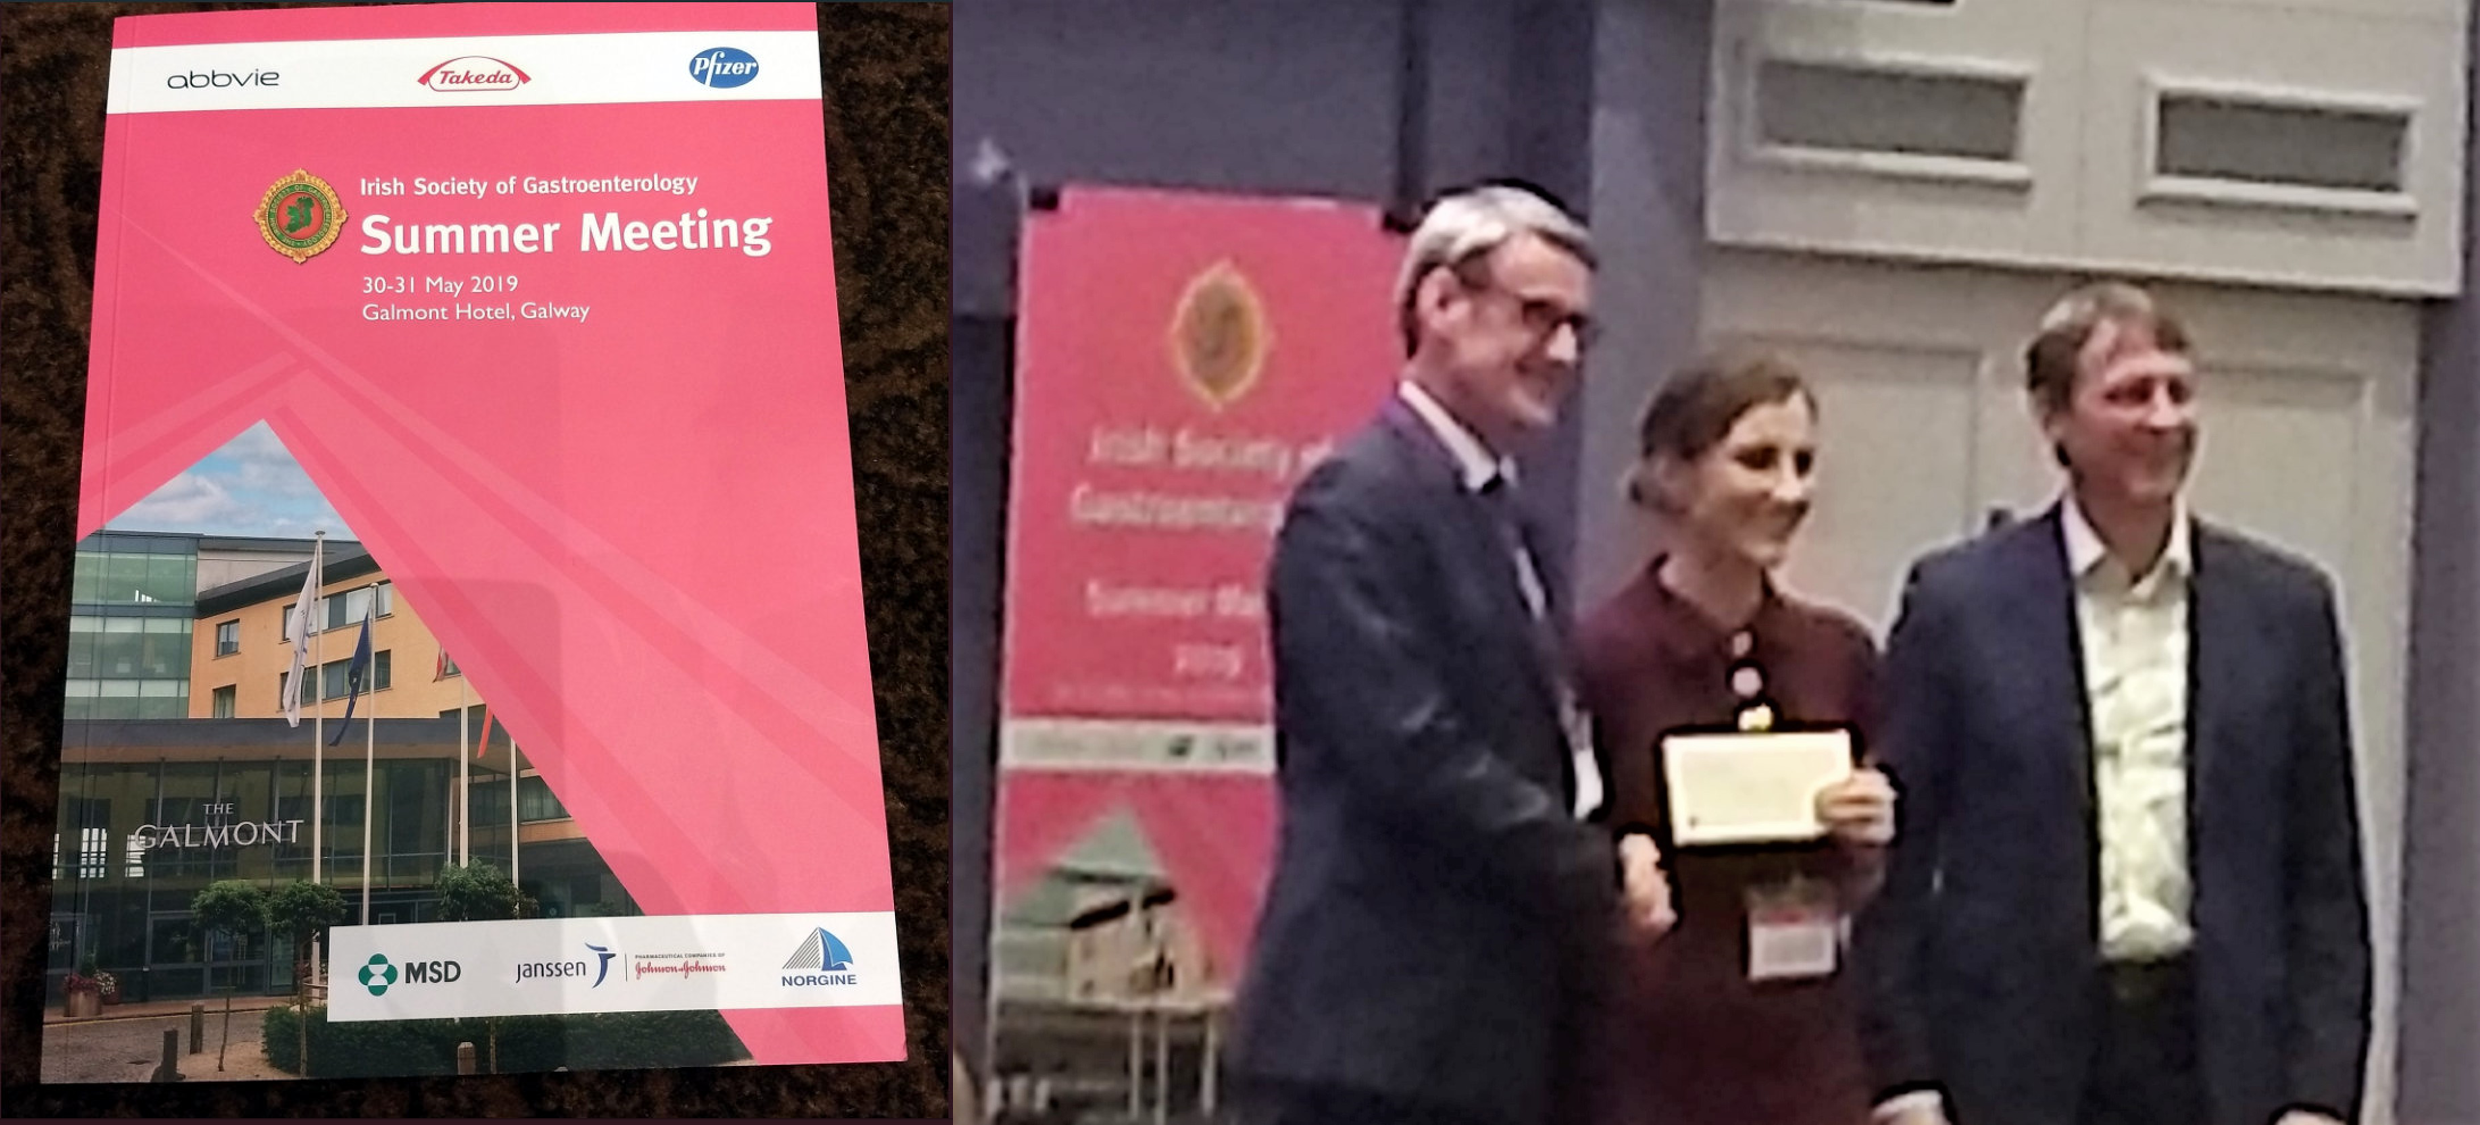 Jacinta Walsh, PhD candidate School of Pharmacy, wins 1st prize for ‘Oral Presentation’ at the Irish Society of Gastroenterology Meeting 2019